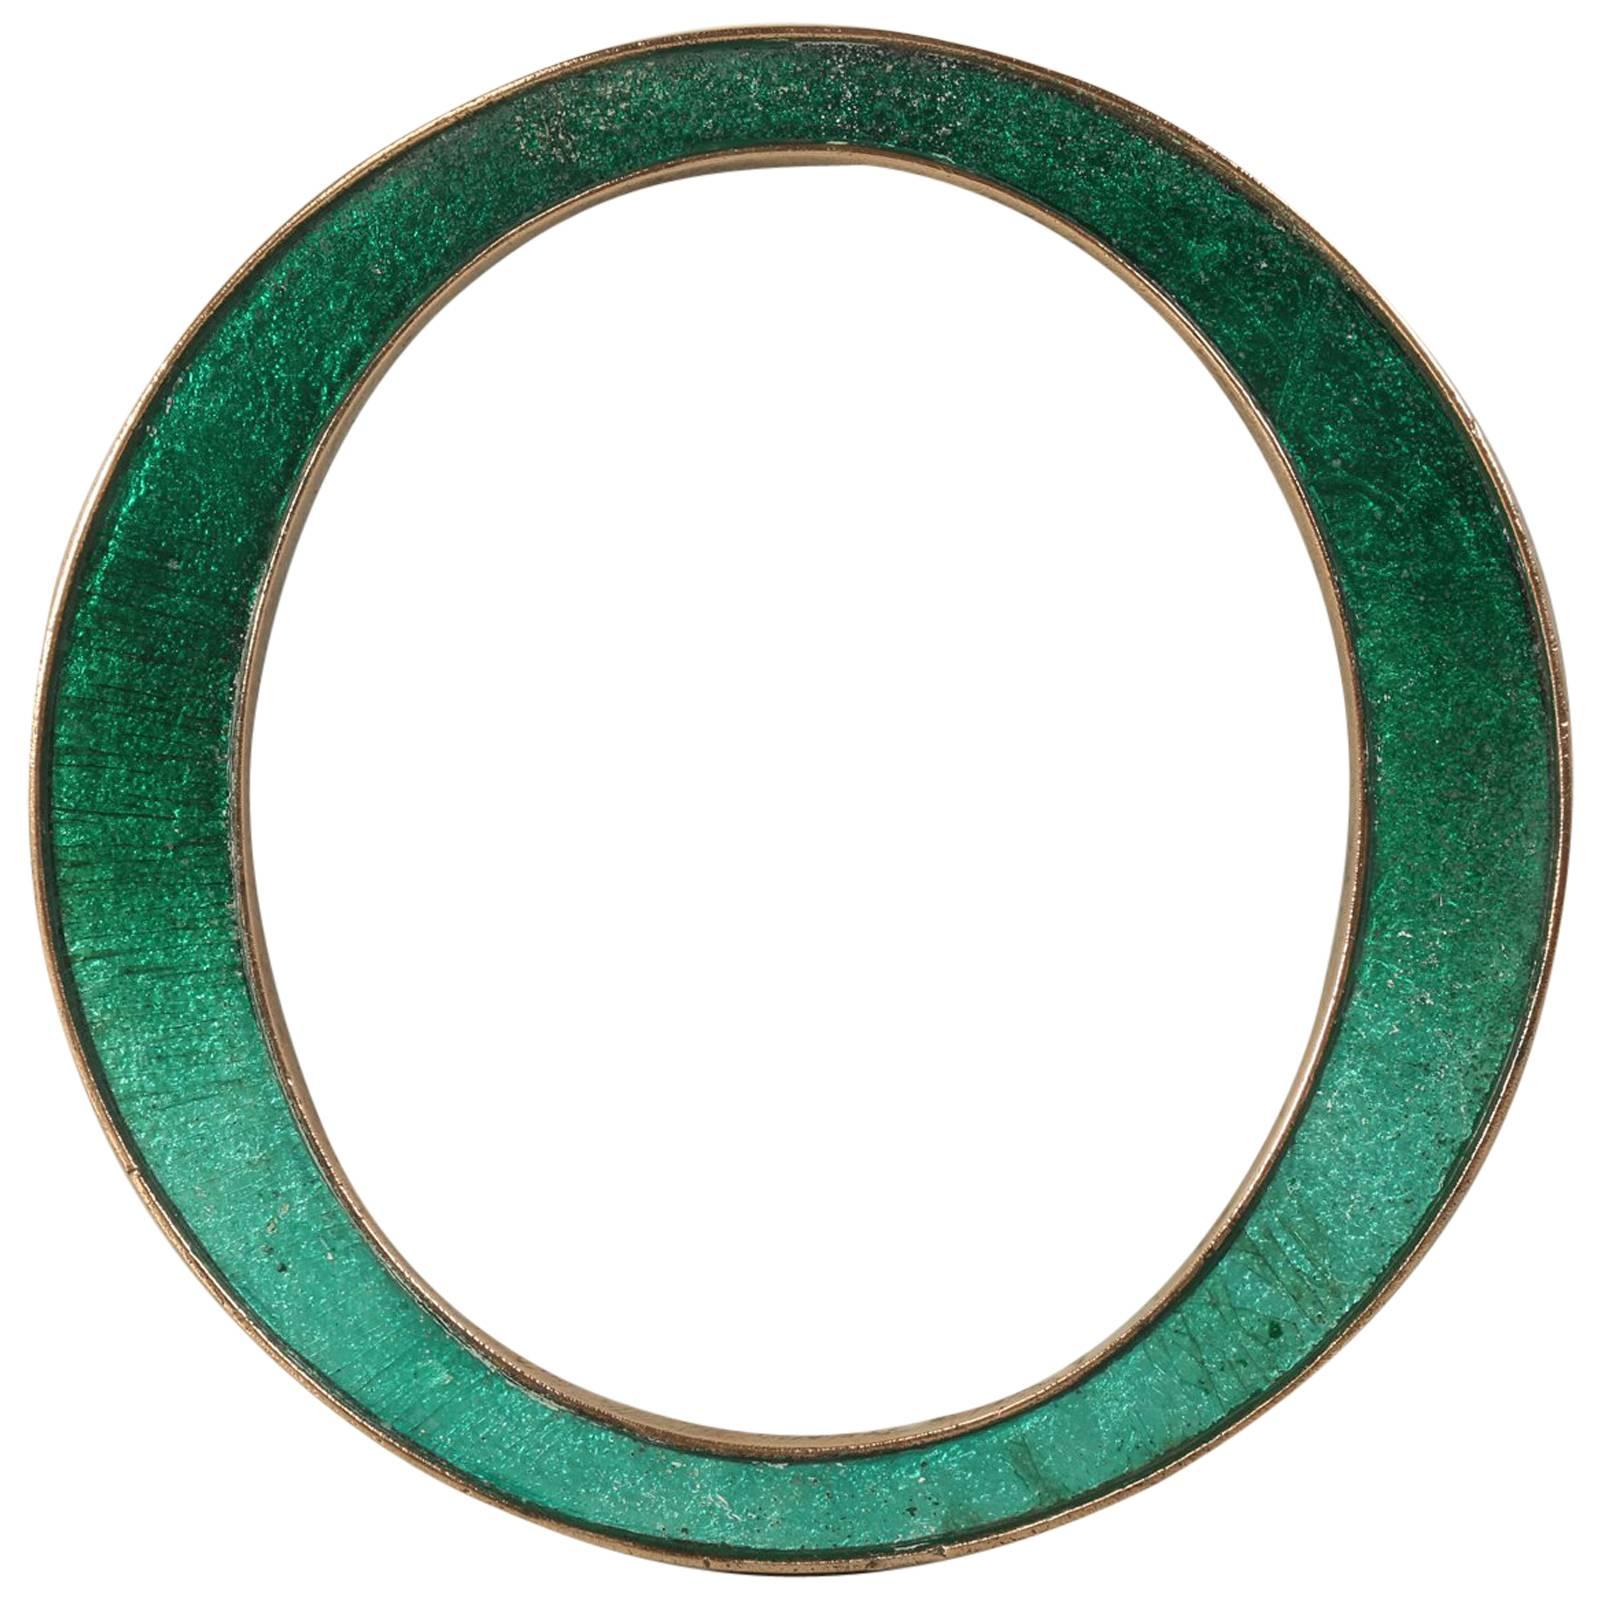 Antique English Letter "O" Made of Solid Cast Copper with an Enamel Inlay